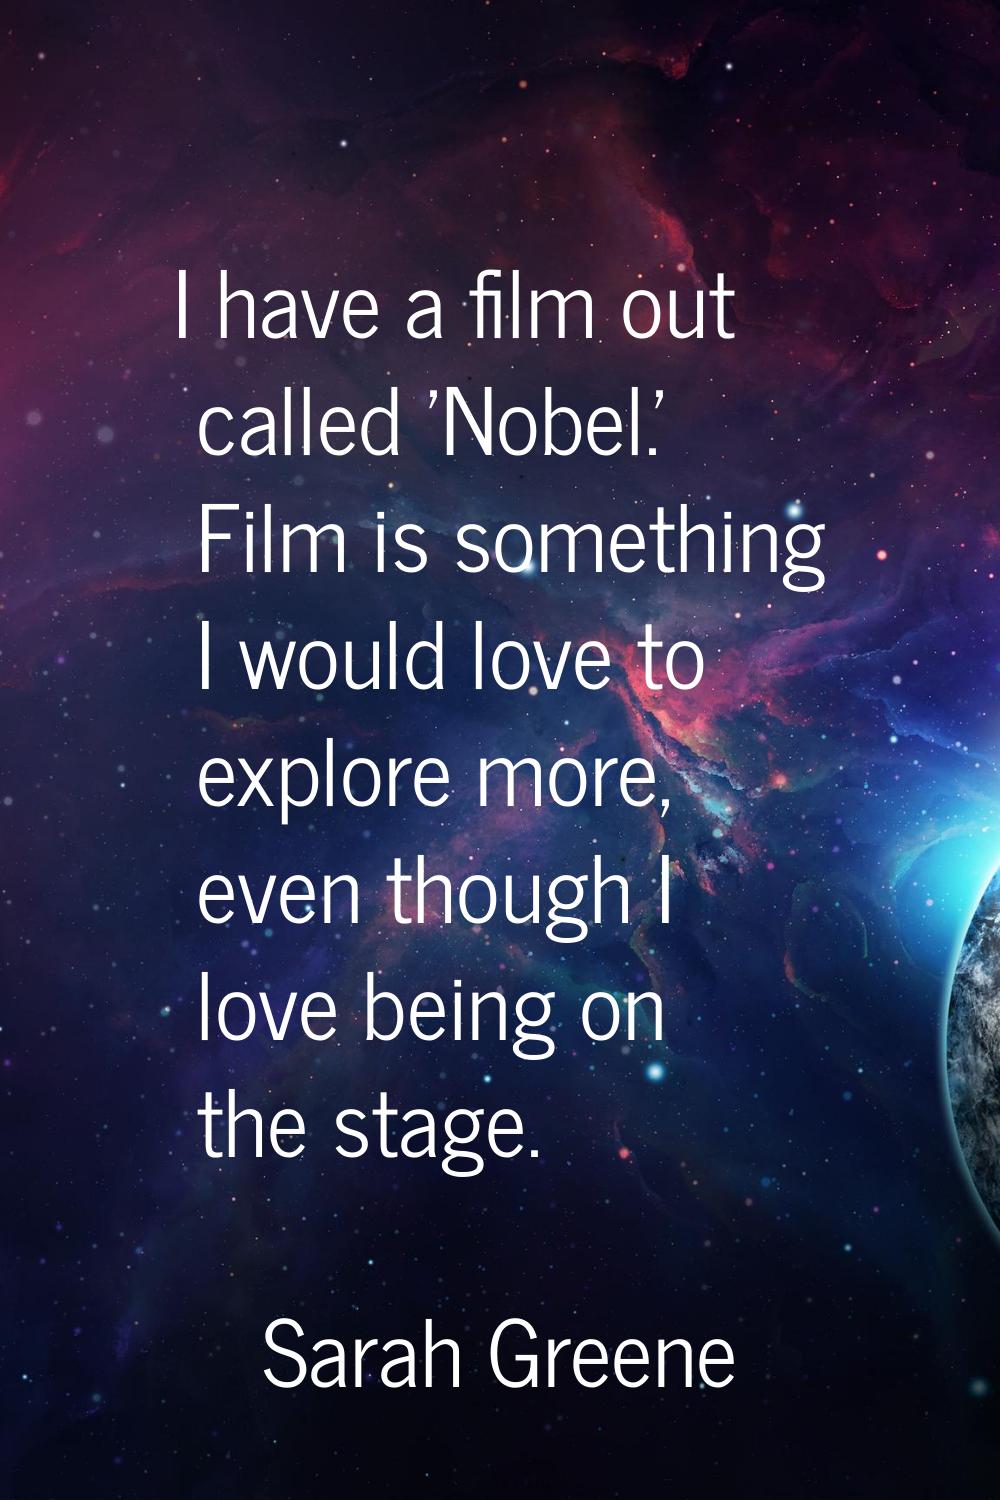 I have a film out called 'Nobel.' Film is something I would love to explore more, even though I lov